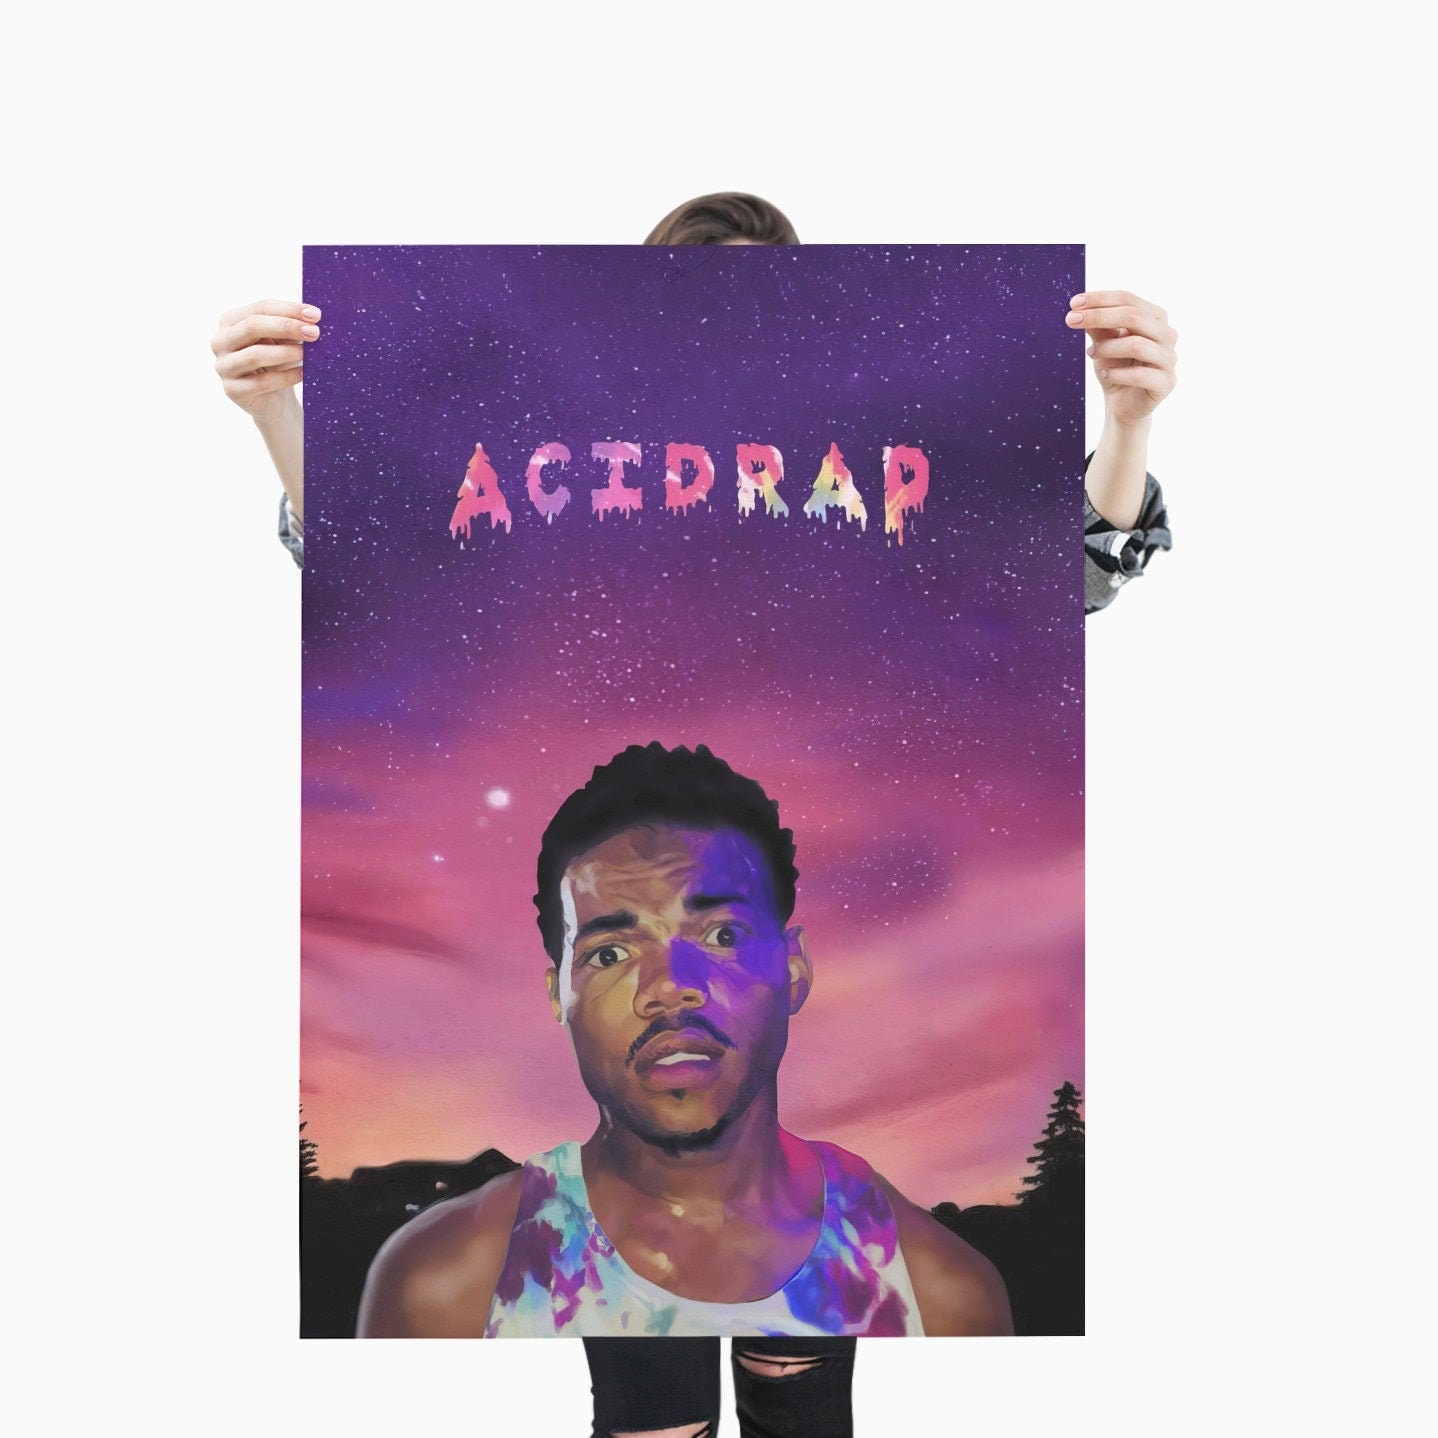 Chance the Rapper, Acid Rap, Vinyl LP Record Framed and Ready to Hang,  Music Gift, Display, Wall Art 